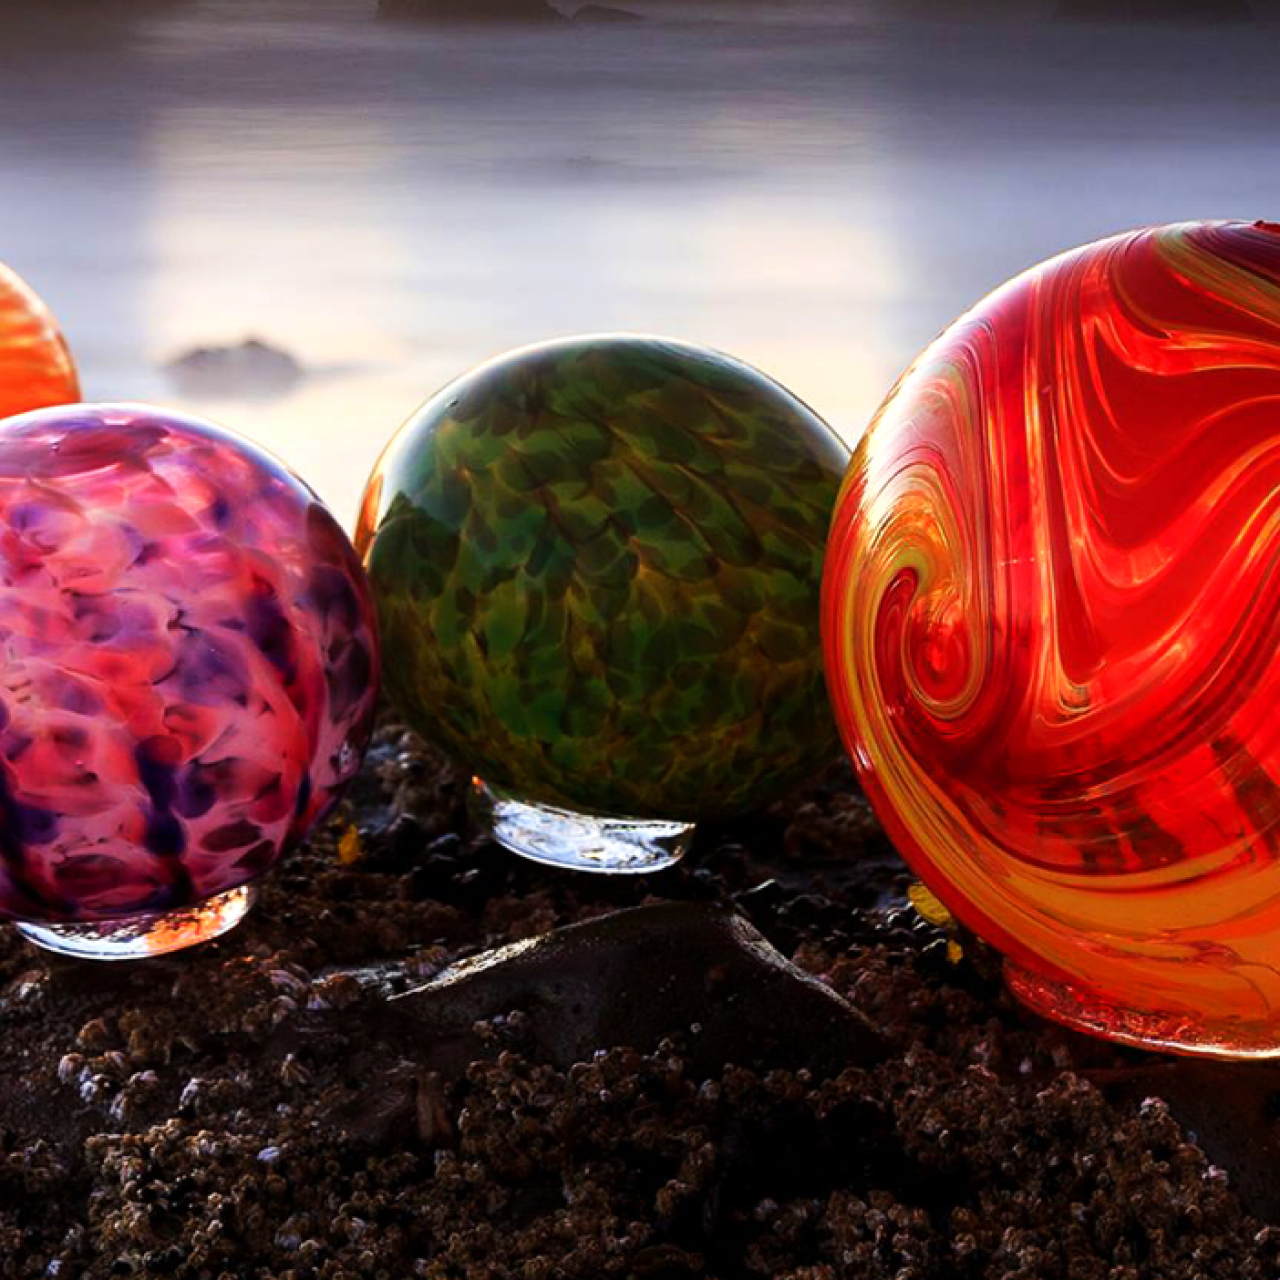 Every Year, Thousands of Glass Orbs Are Hidden on This Oregon